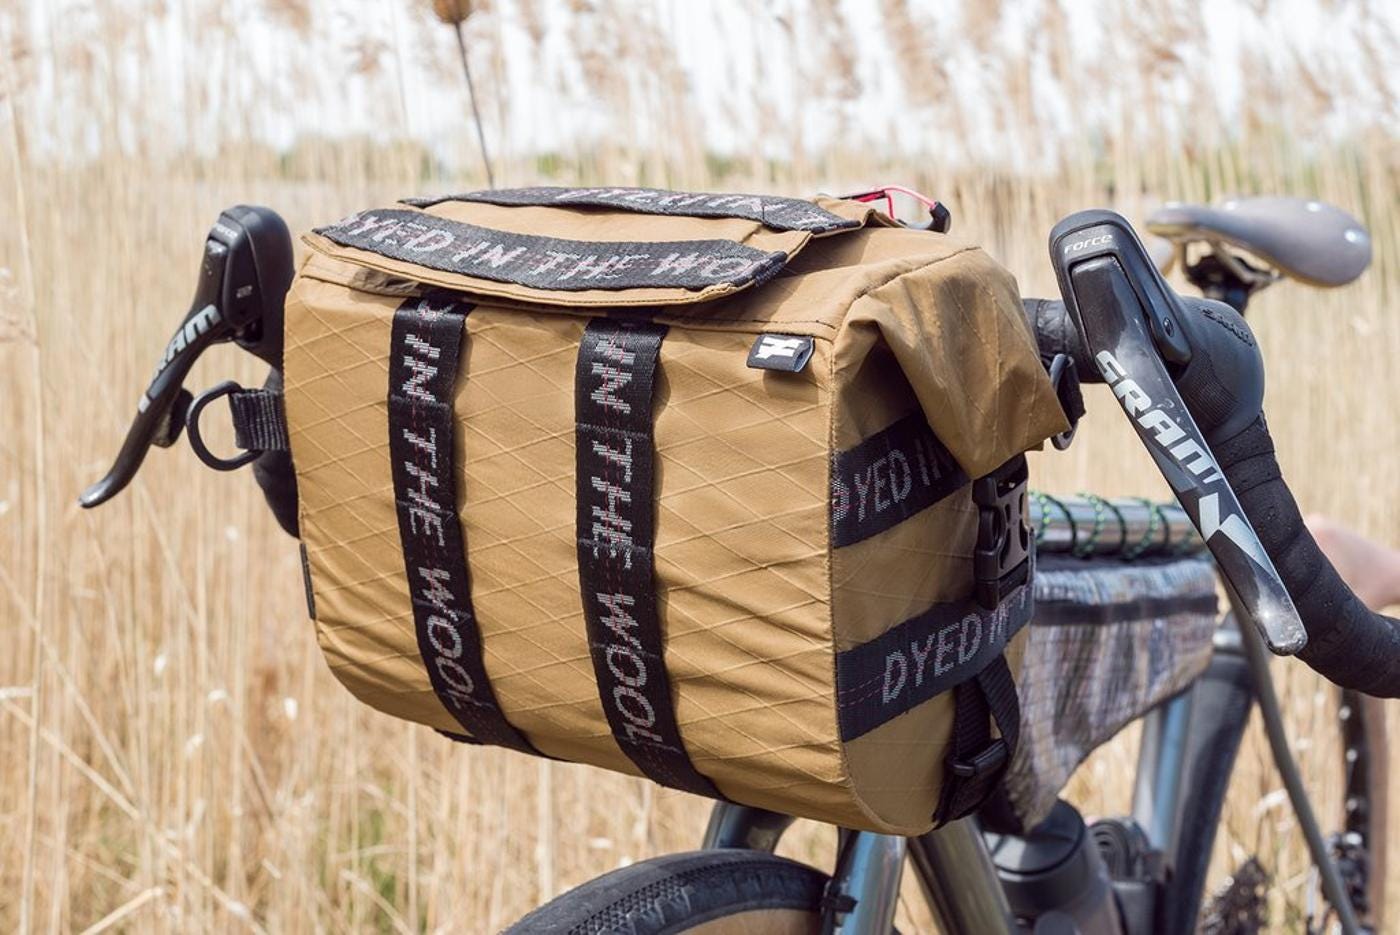 Dyed in the Wool XL Bar Bag | The Radavist | A group of individuals who  share a love of cycling and the outdoors.